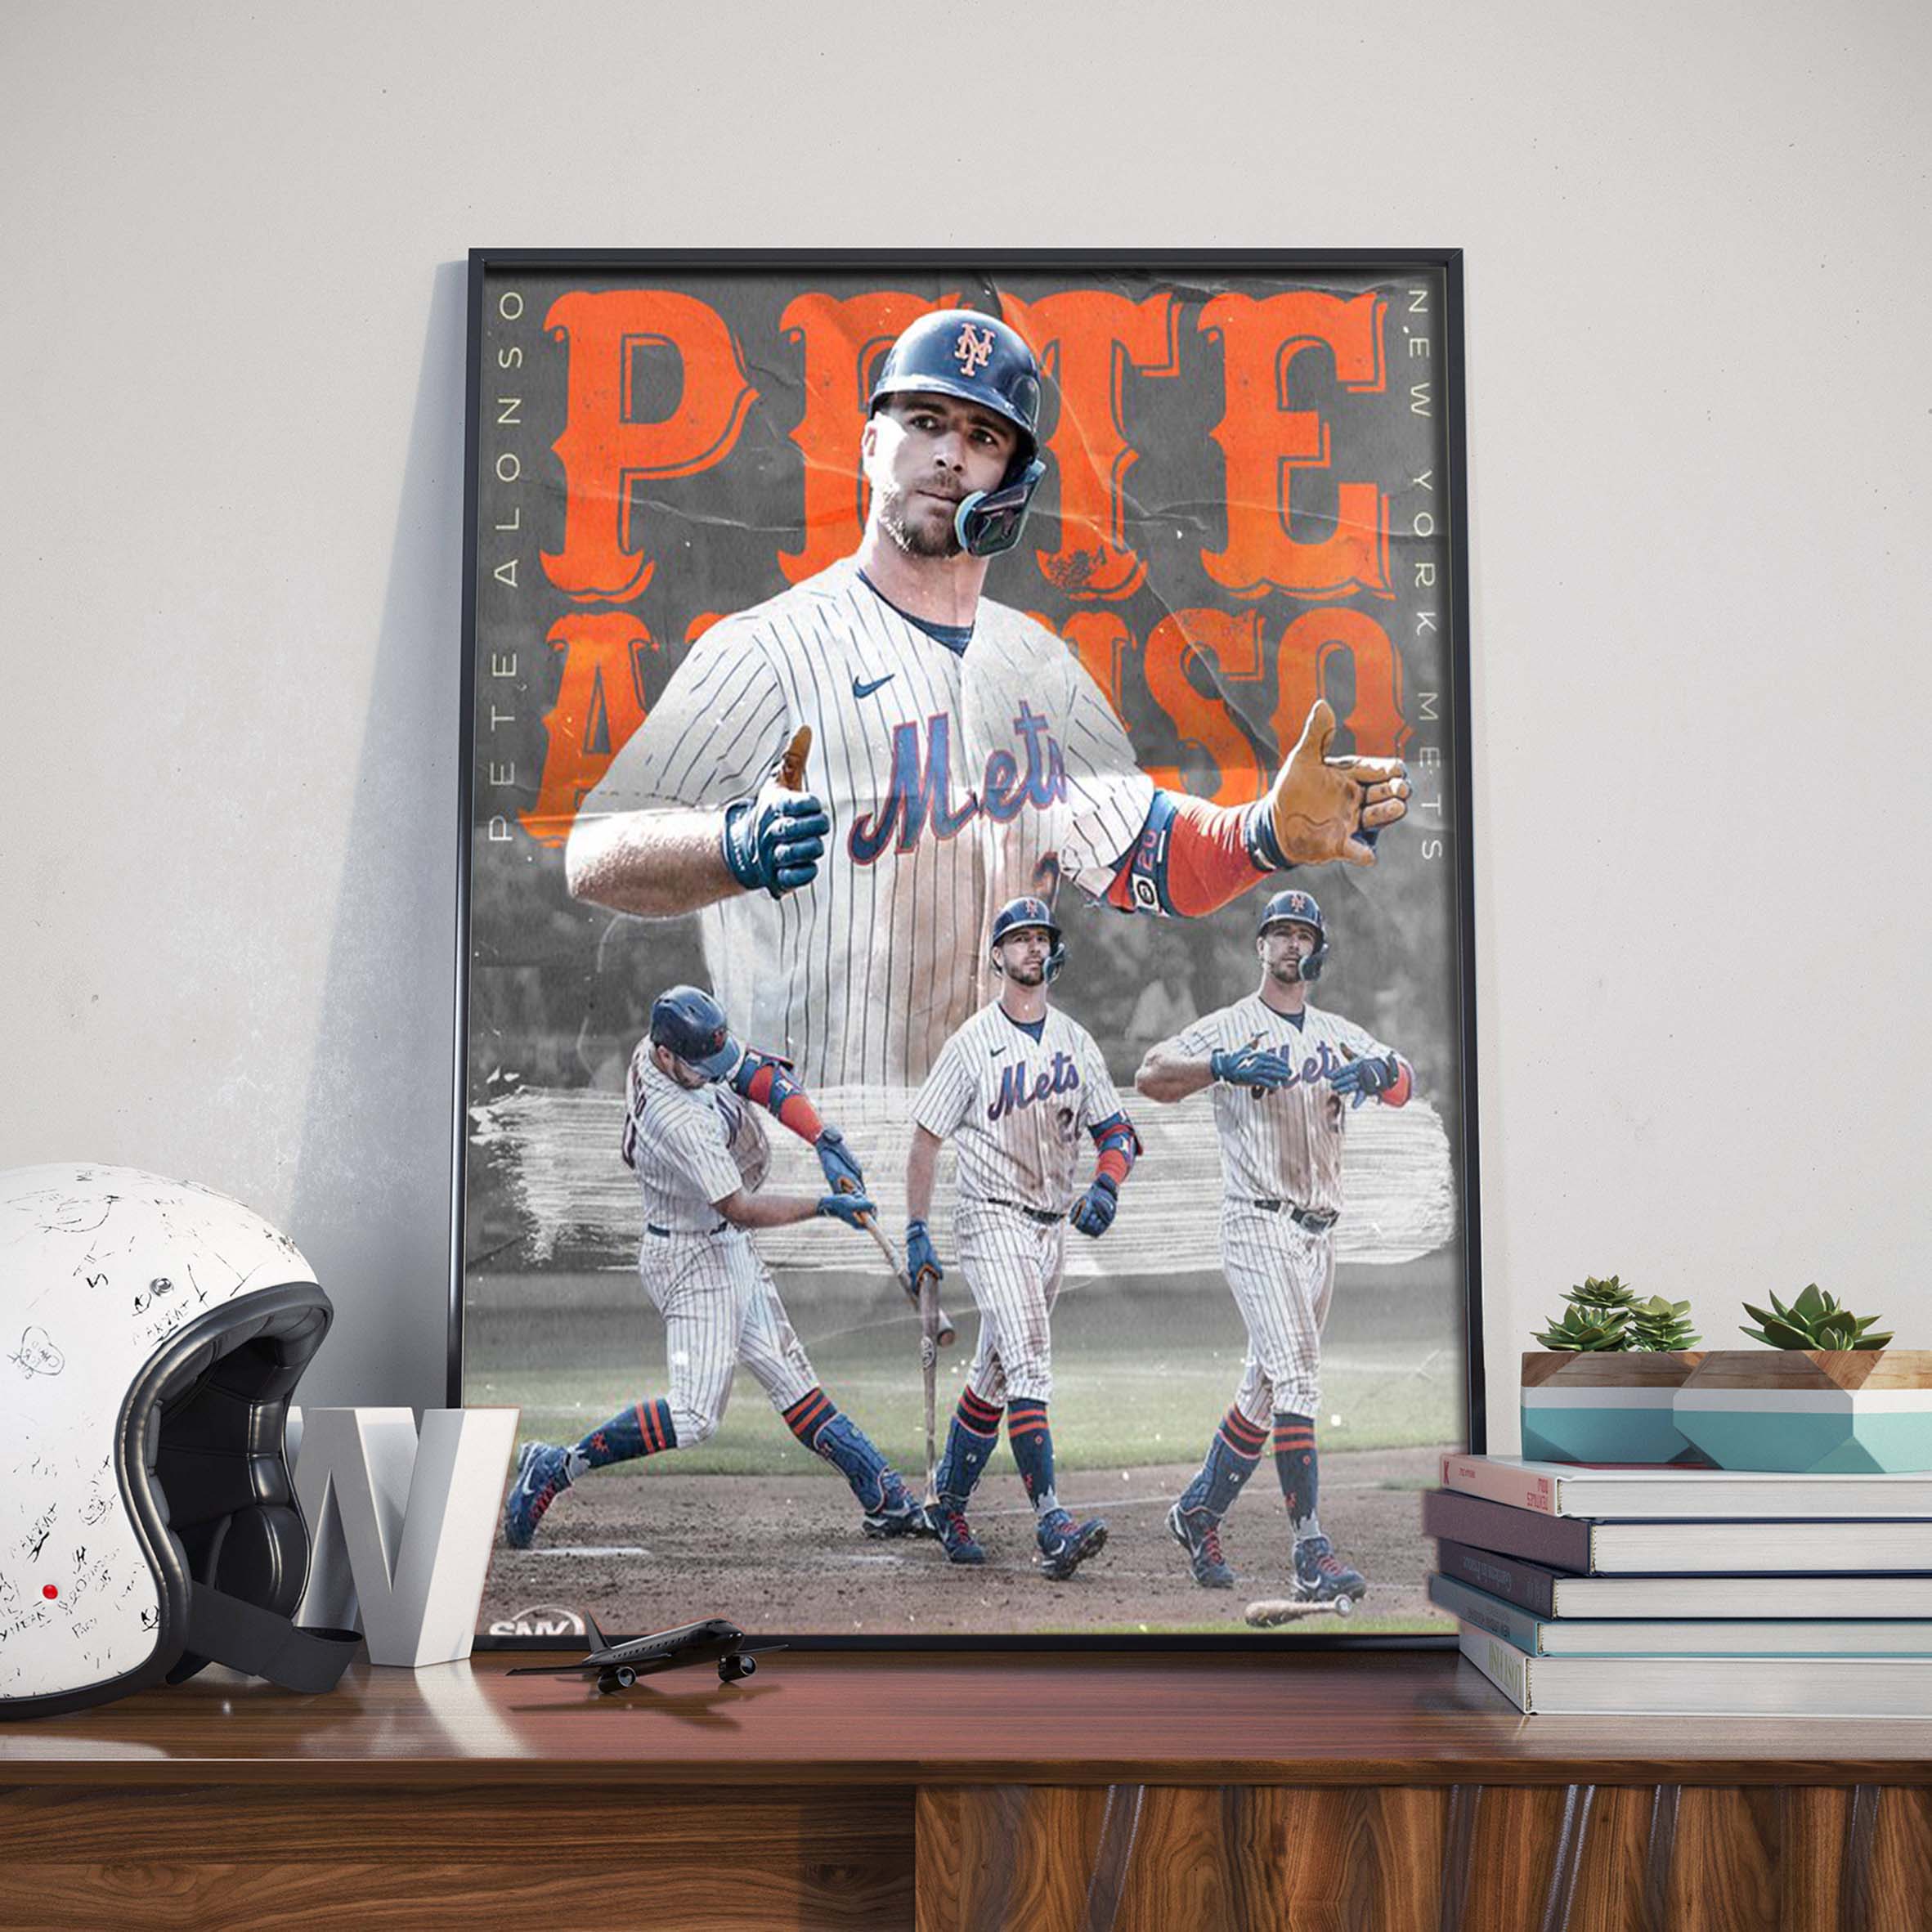 Pete Alonse League Leader in RBI Artwork Poster Canvas